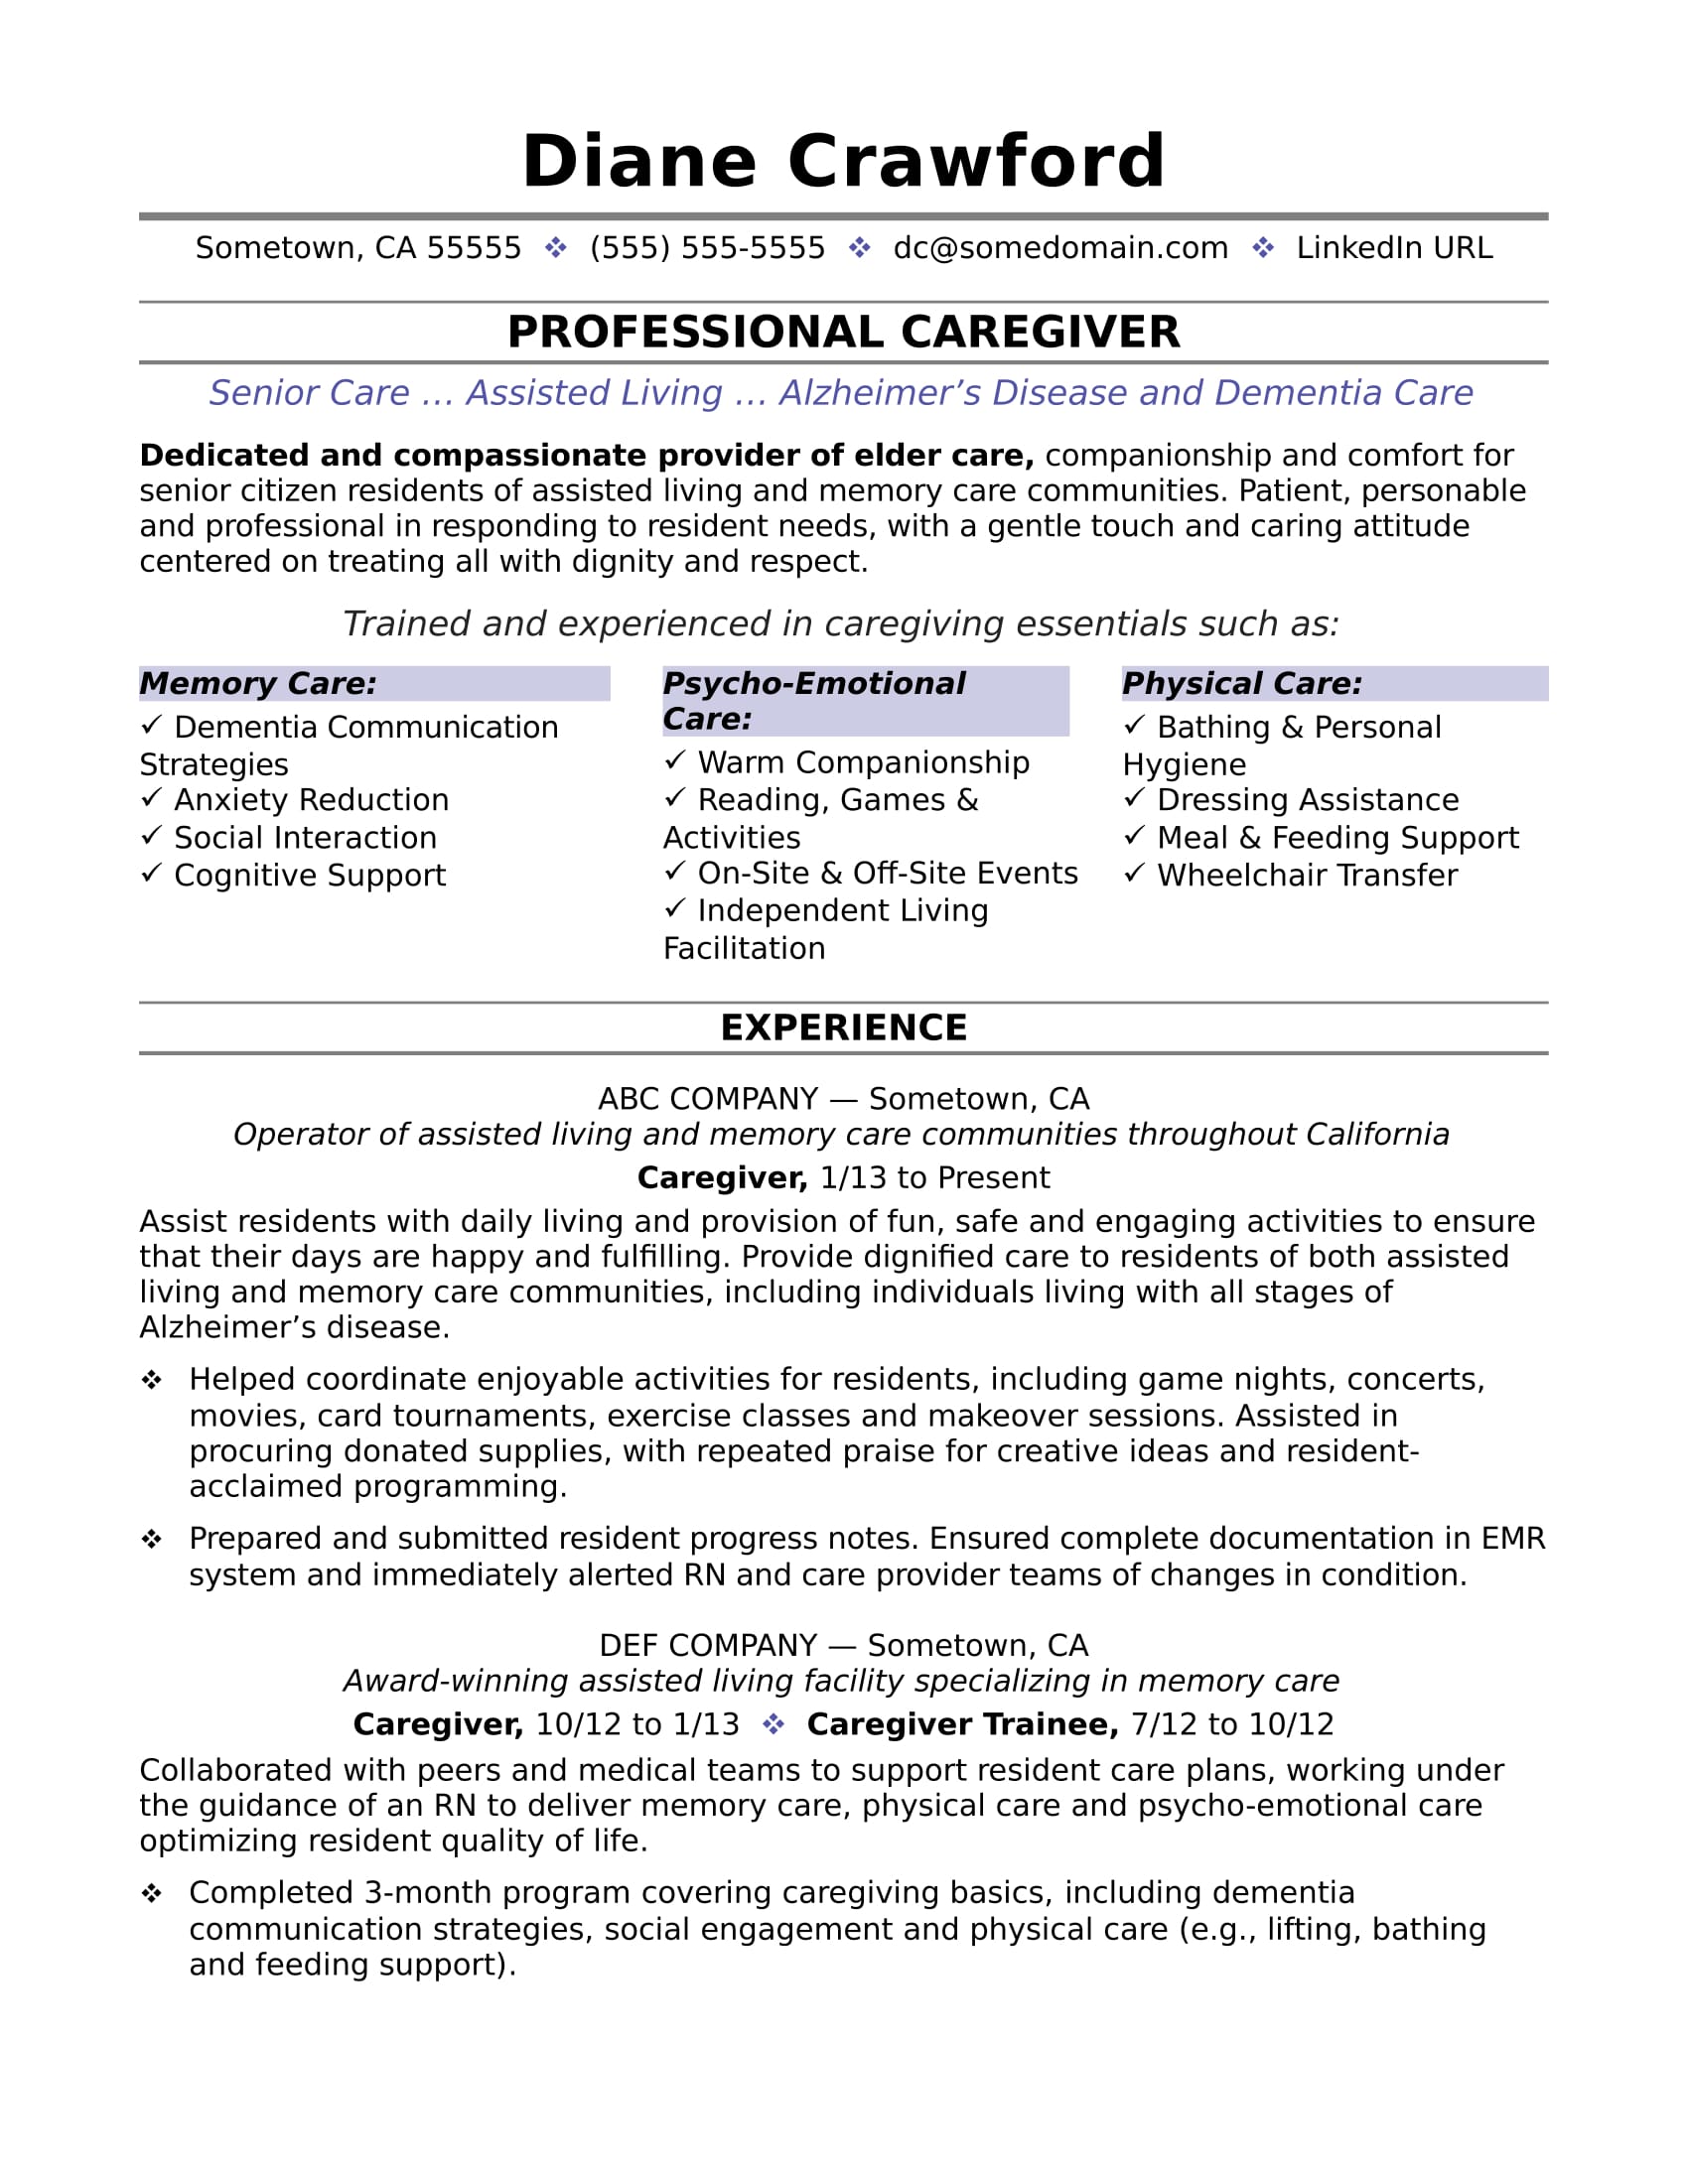 Resume Samples for Healthcare Workers in the Philippines – FilipiKnow